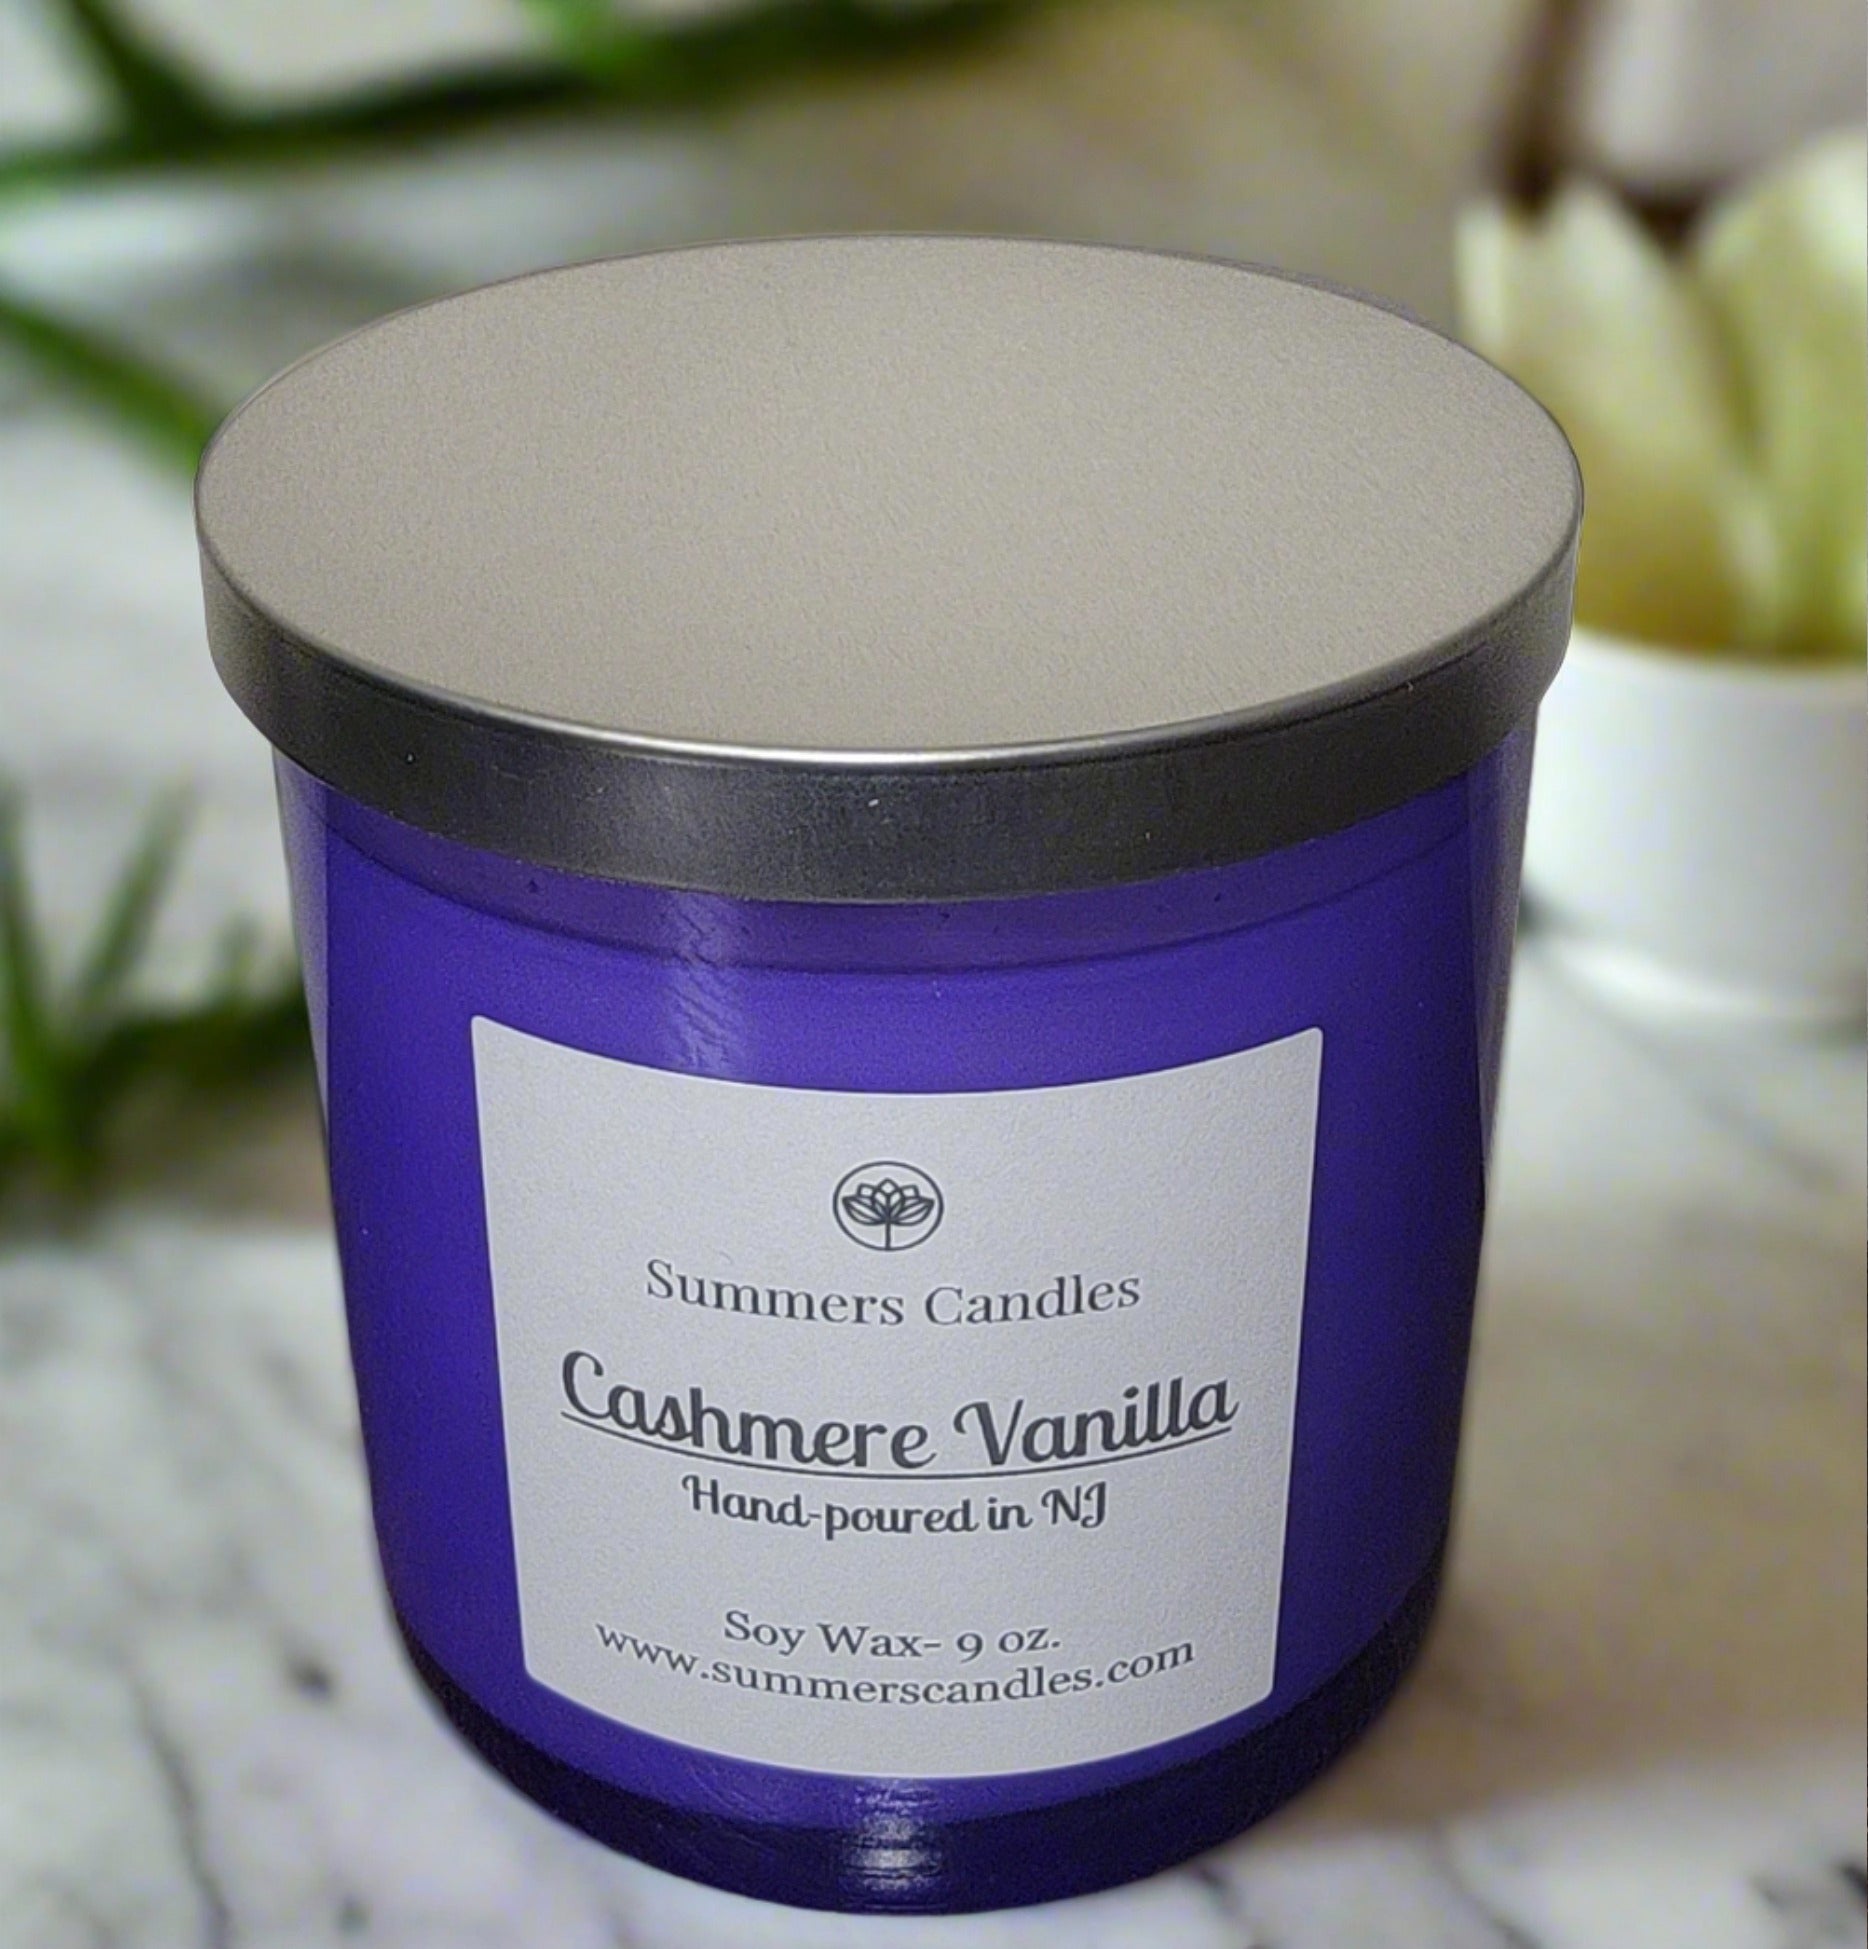 Cashmere Vanilla- Summers Candles 